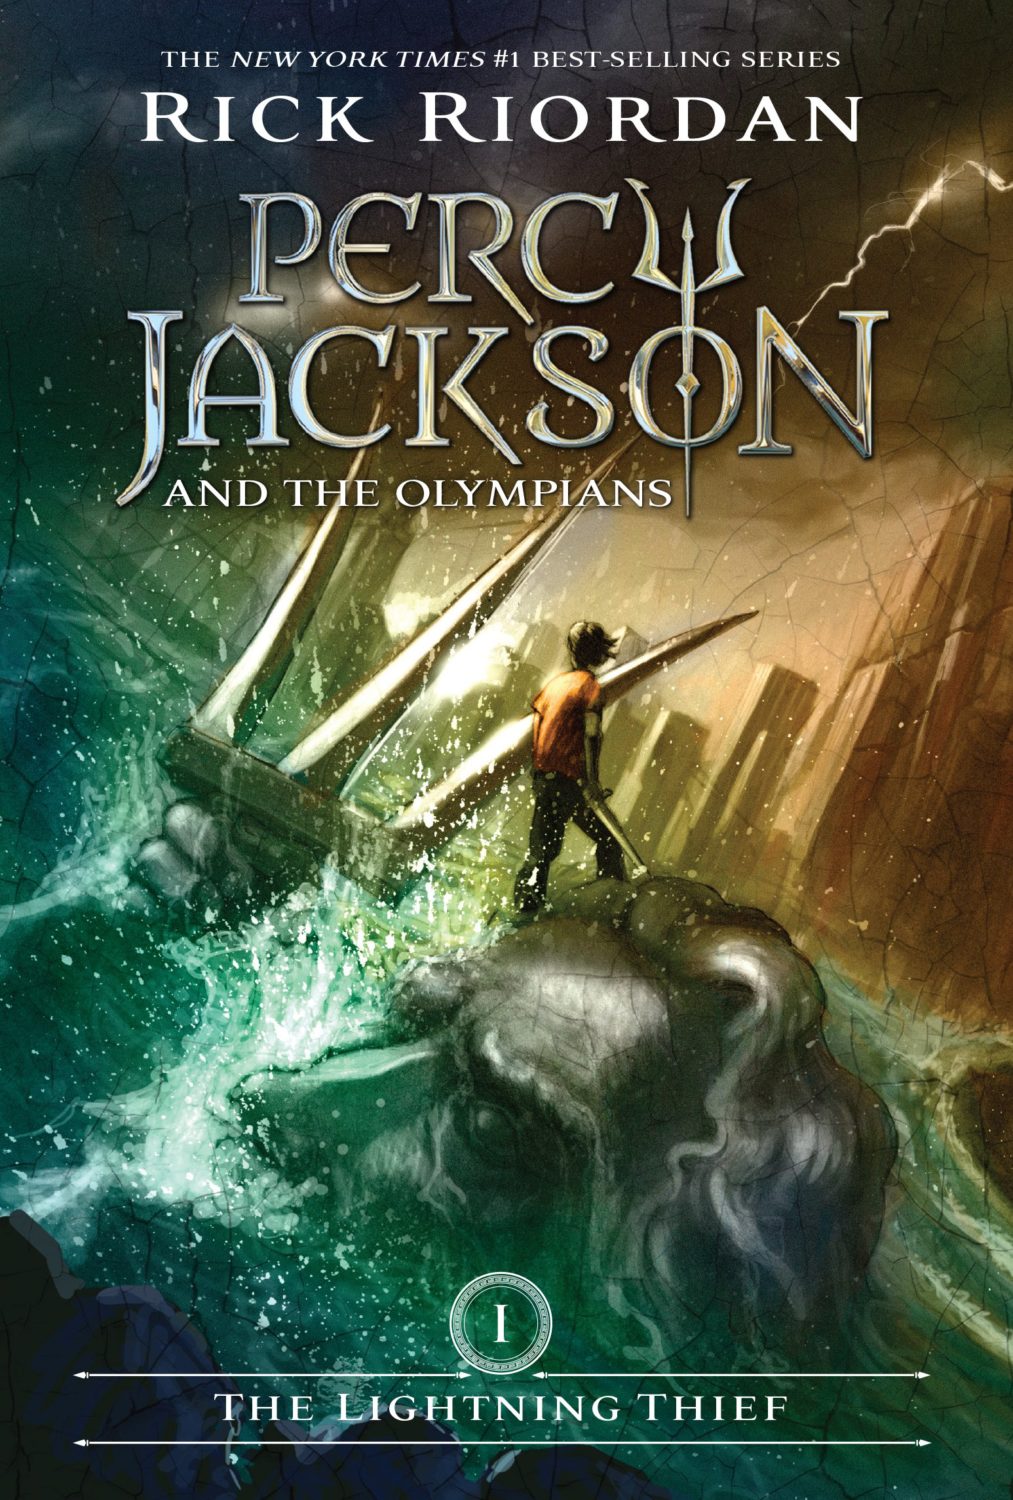 Percy Jackson and the Lightning Thief and 16 more magic school books.